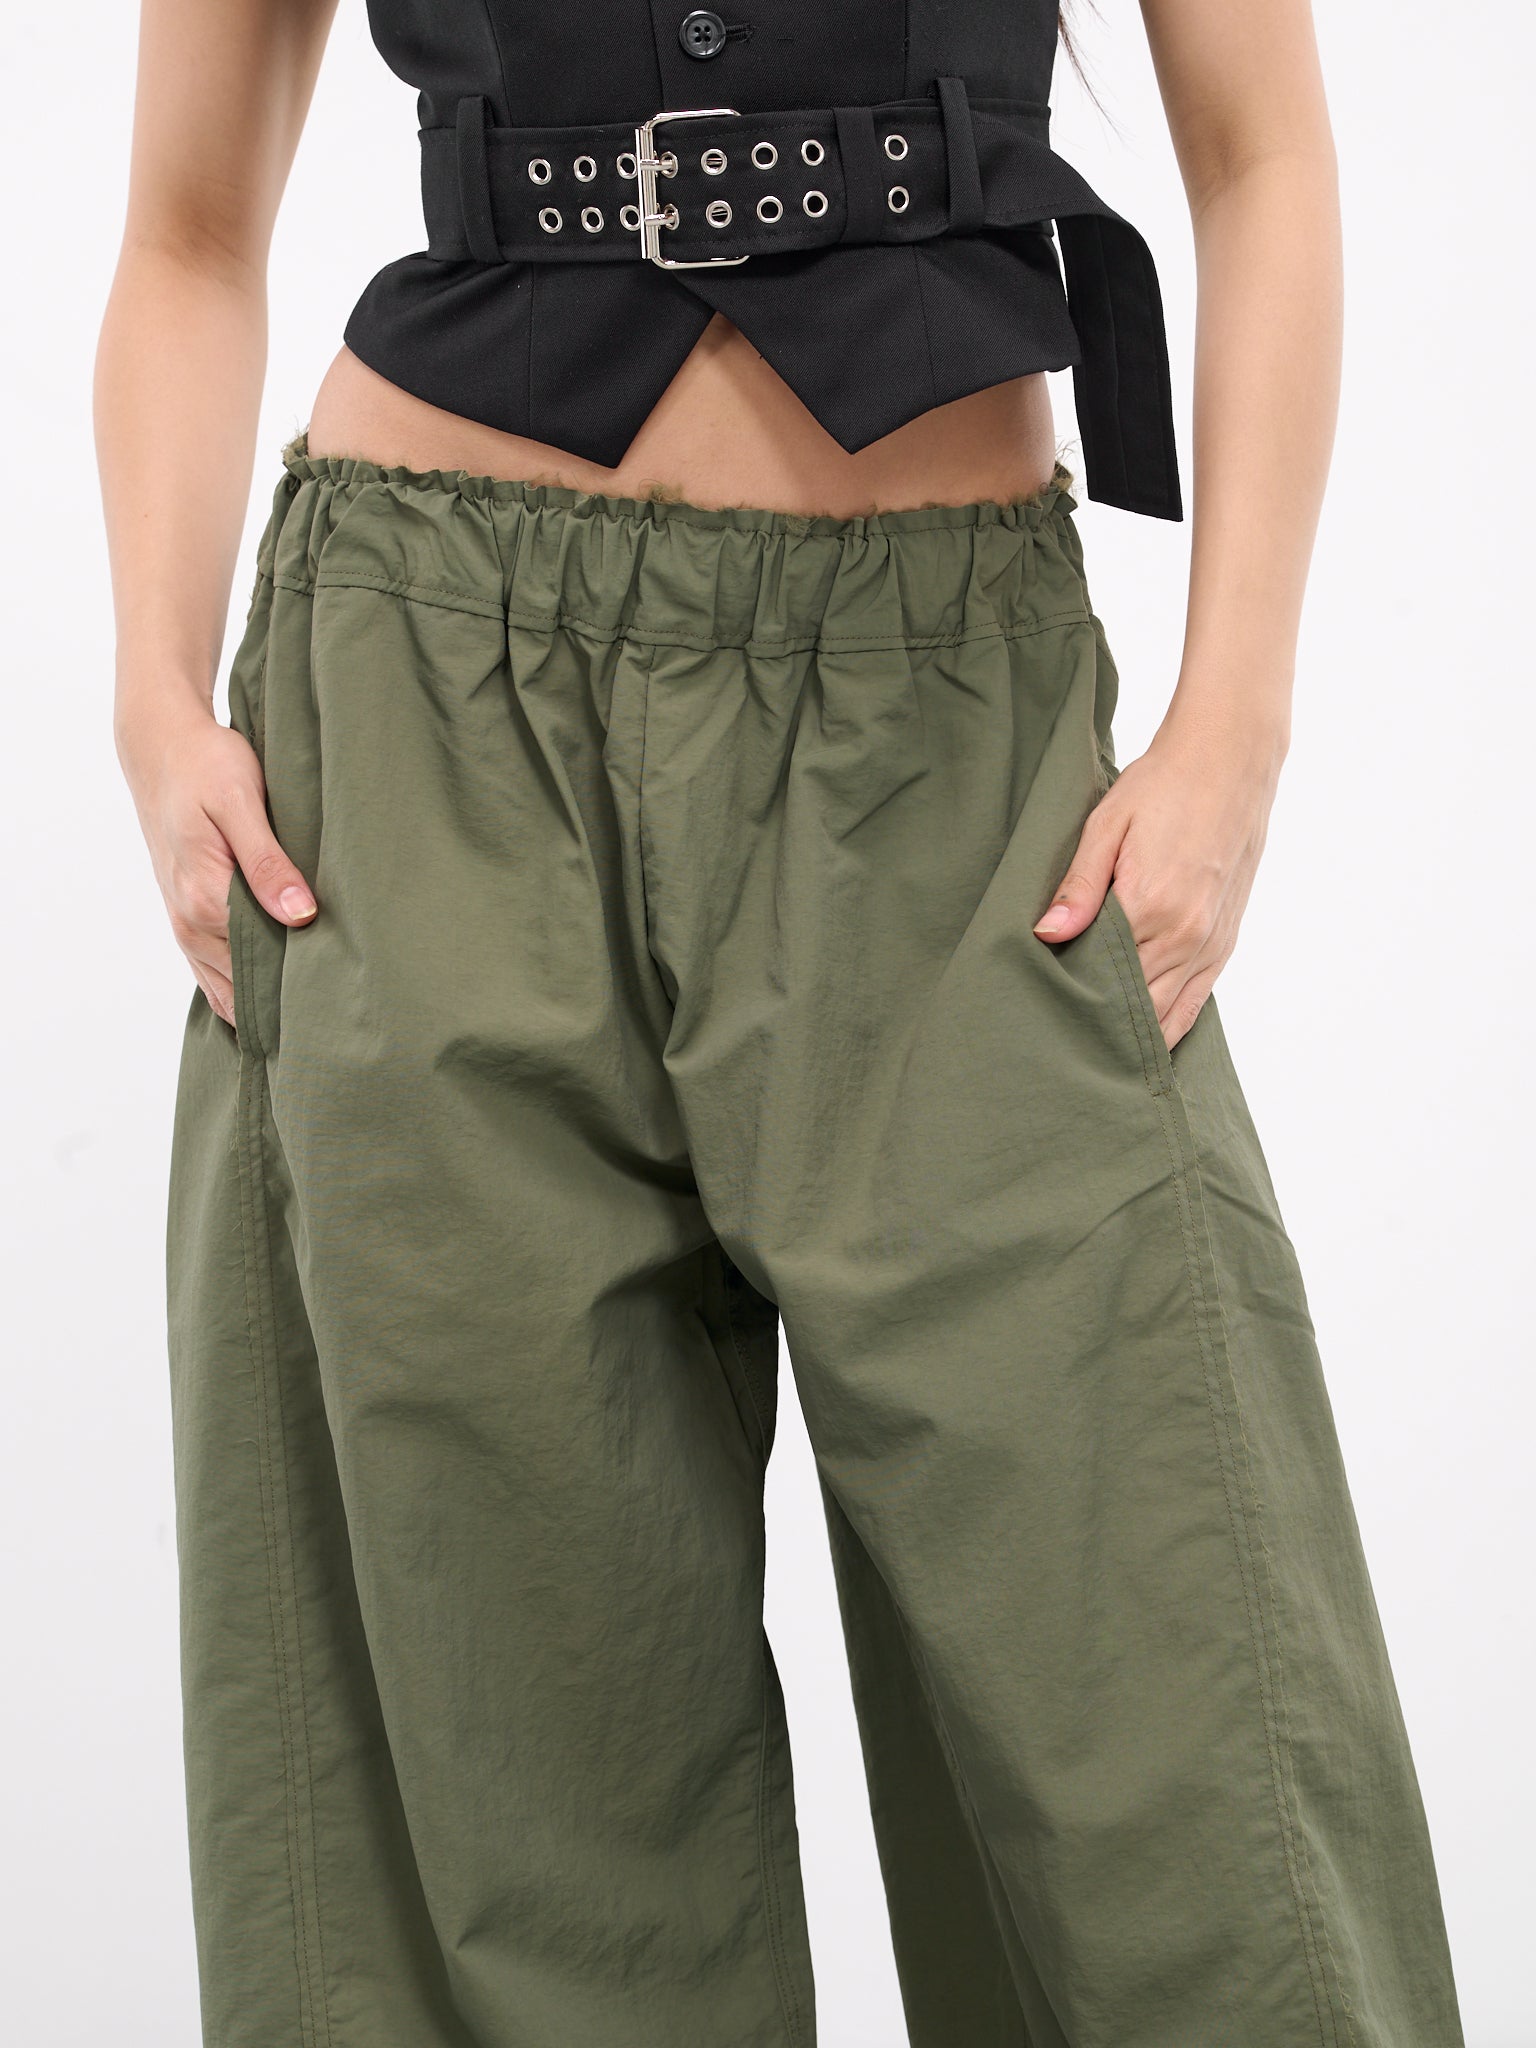 Warm Up Trousers (WARM-UP-TROUSERS-KHAKI)